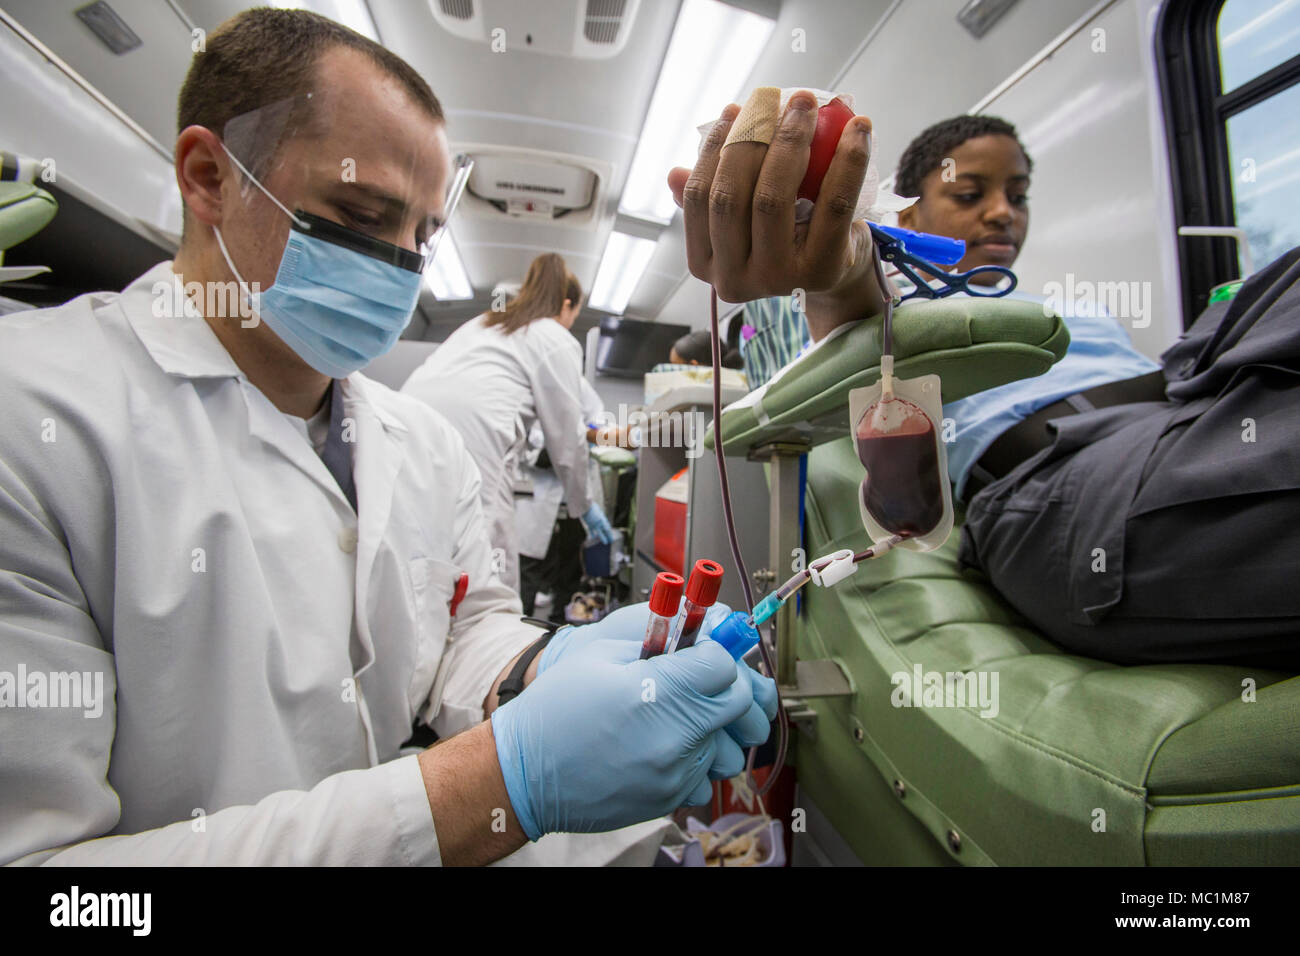 Phlebotomist Kevin Clark, left, Miller Keystone Blood Center, Ewing, N.J., takes blood samples from Cadet Tatiana Constant during a blood drive at the New Jersey National Guard Youth ChalleNGe Academy at Joint Base McGuire-Dix-Lakehurst, N.J., Jan. 24, 2018. The Youth ChalleNGe Academy is an education program that provides 16 to 18 year-old high school dropouts the opportunity to undergo an intense 22-week structured residential program in a quasi-military environment and prepares them for the GED exam. (New Jersey National Guard photo by Mark C. Olsen) Stock Photo